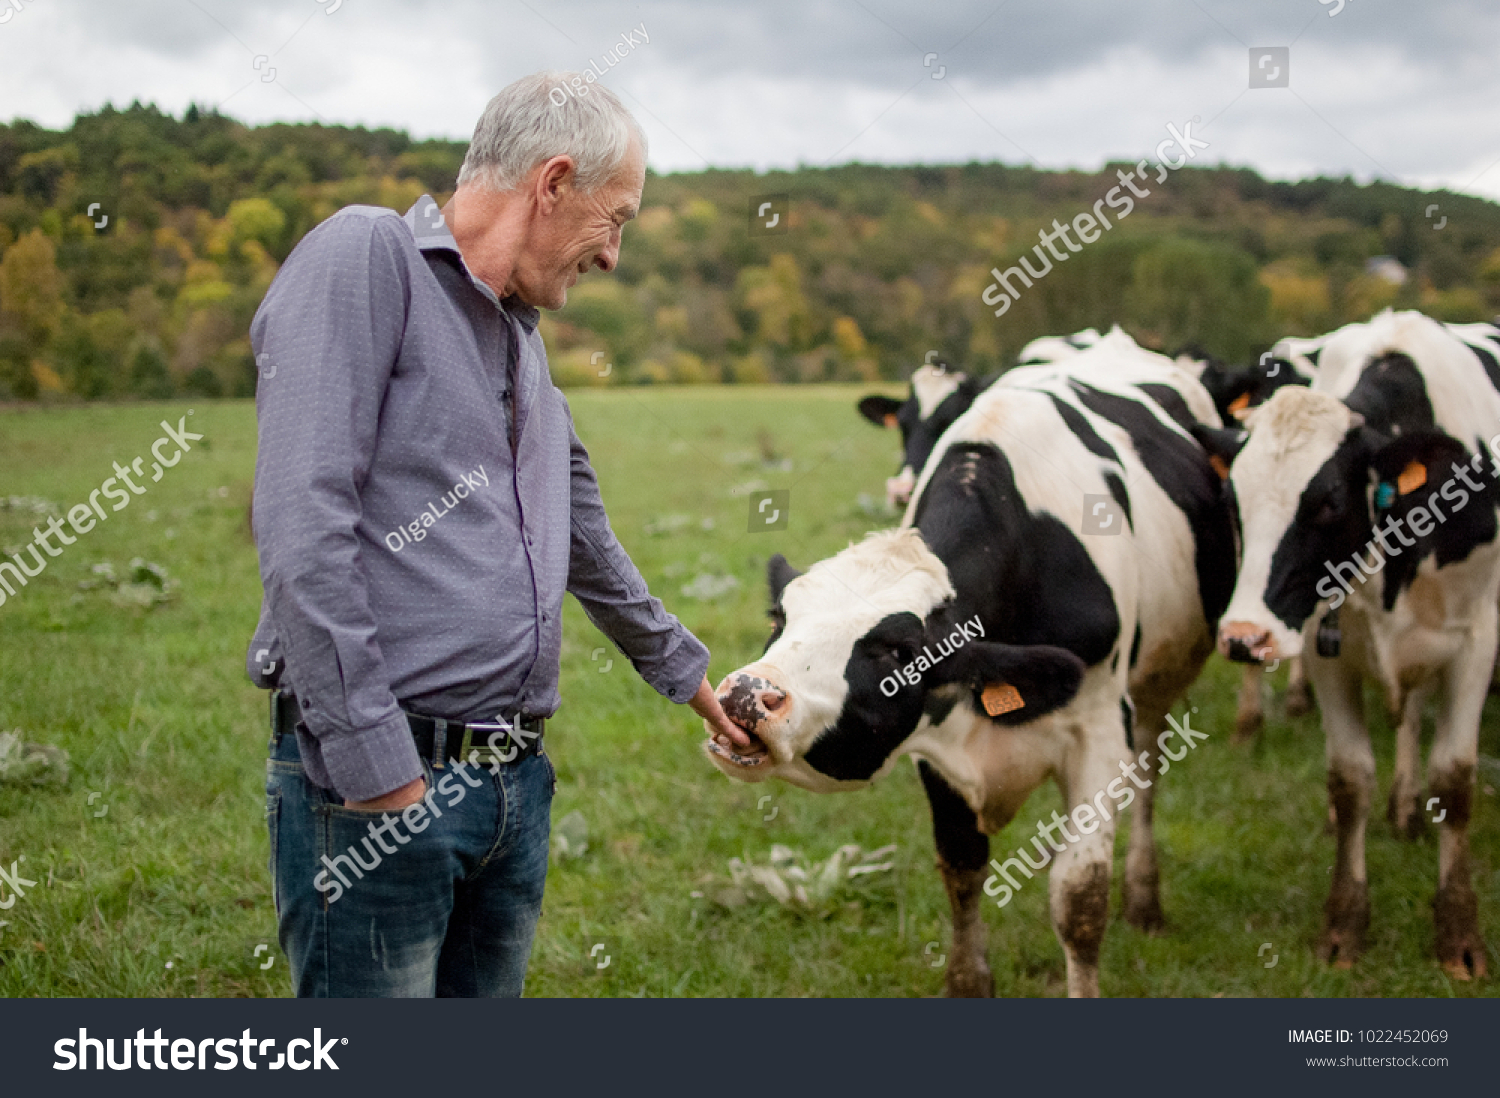 Side View of Senior Farmer Proudly Looking at His Black and White Cows in the Countryside Outdoors. #1022452069